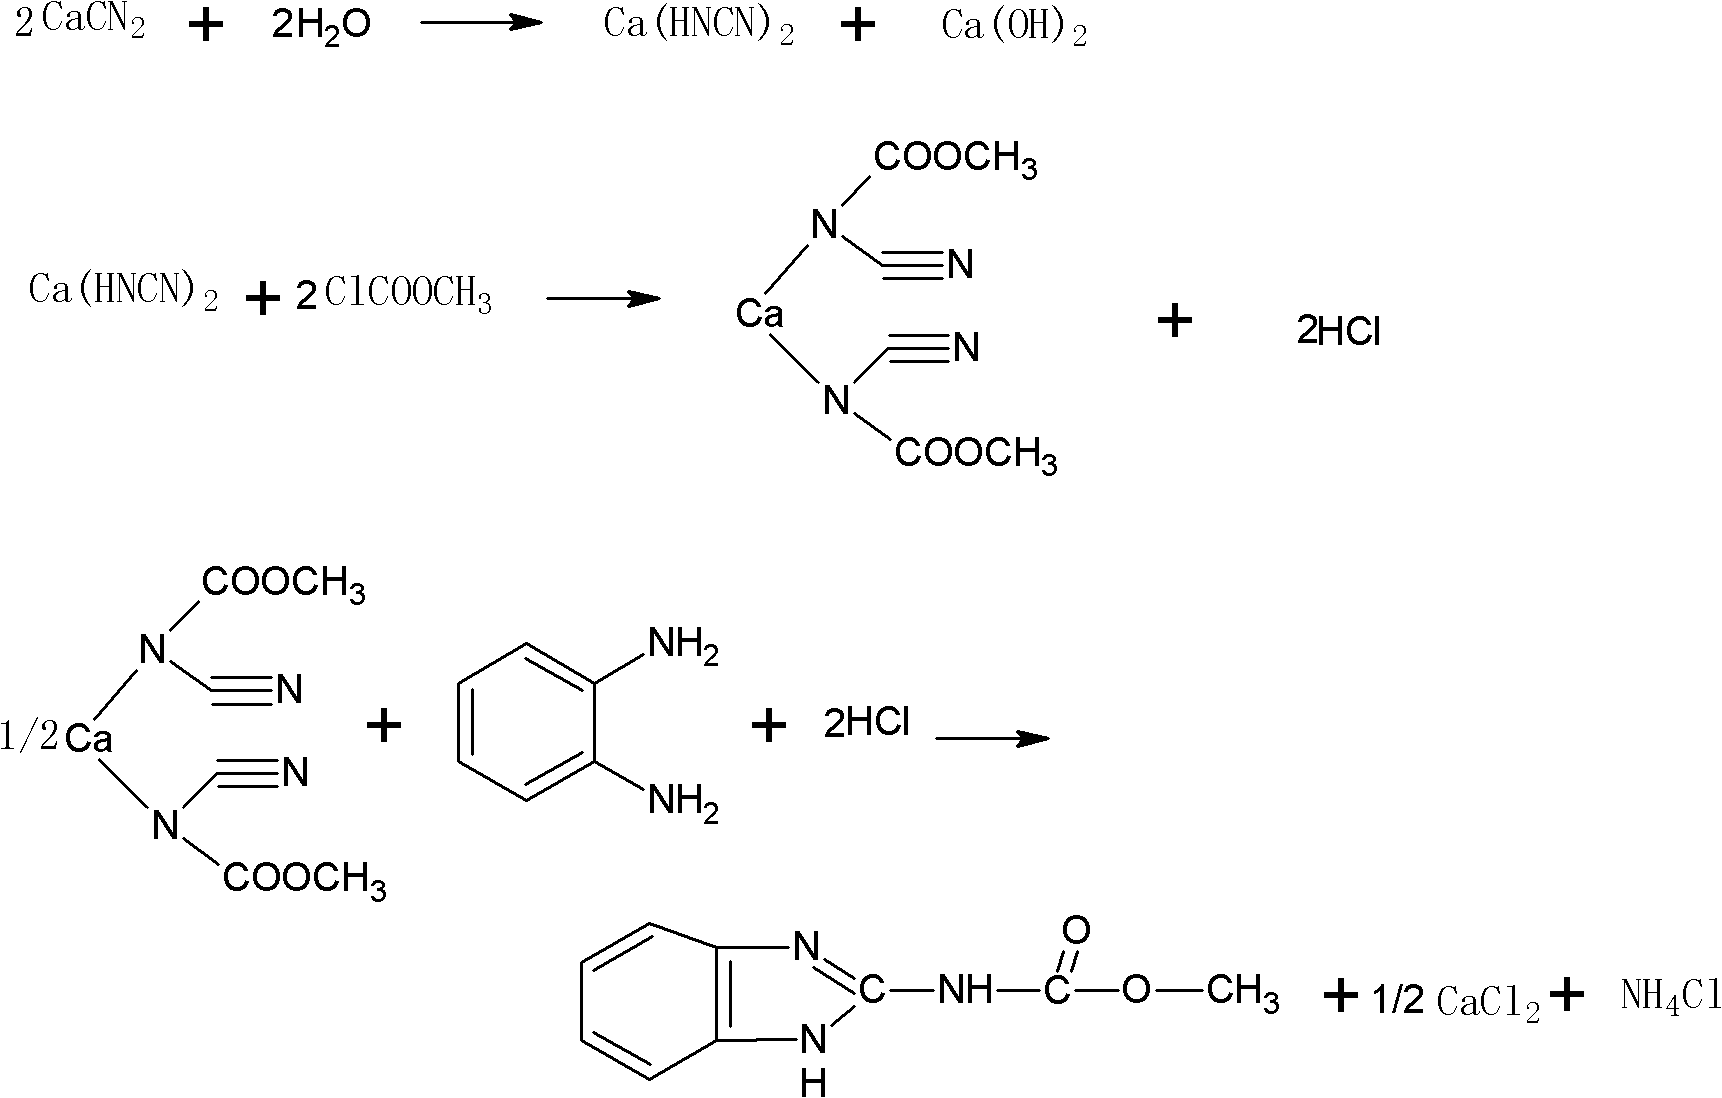 Preparing method for synthesizing sanmate from calcium cyanamide